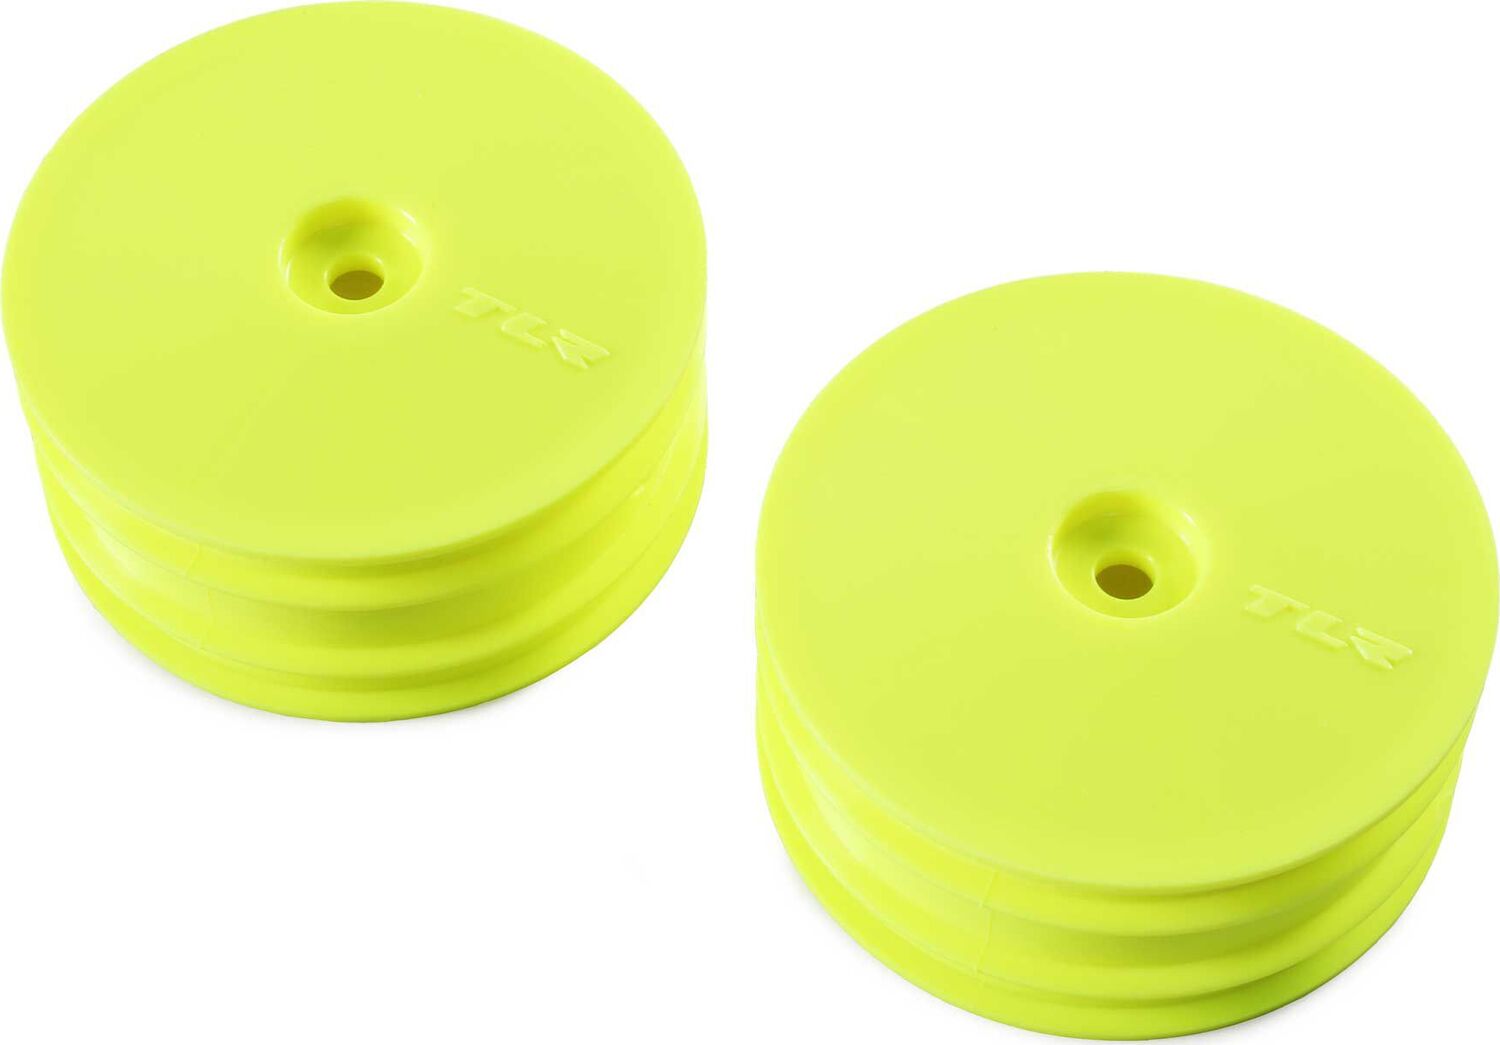 1/10 Front Buggy 2.2 Wheels, 12mm Hex, Yellow (2): 22X-4